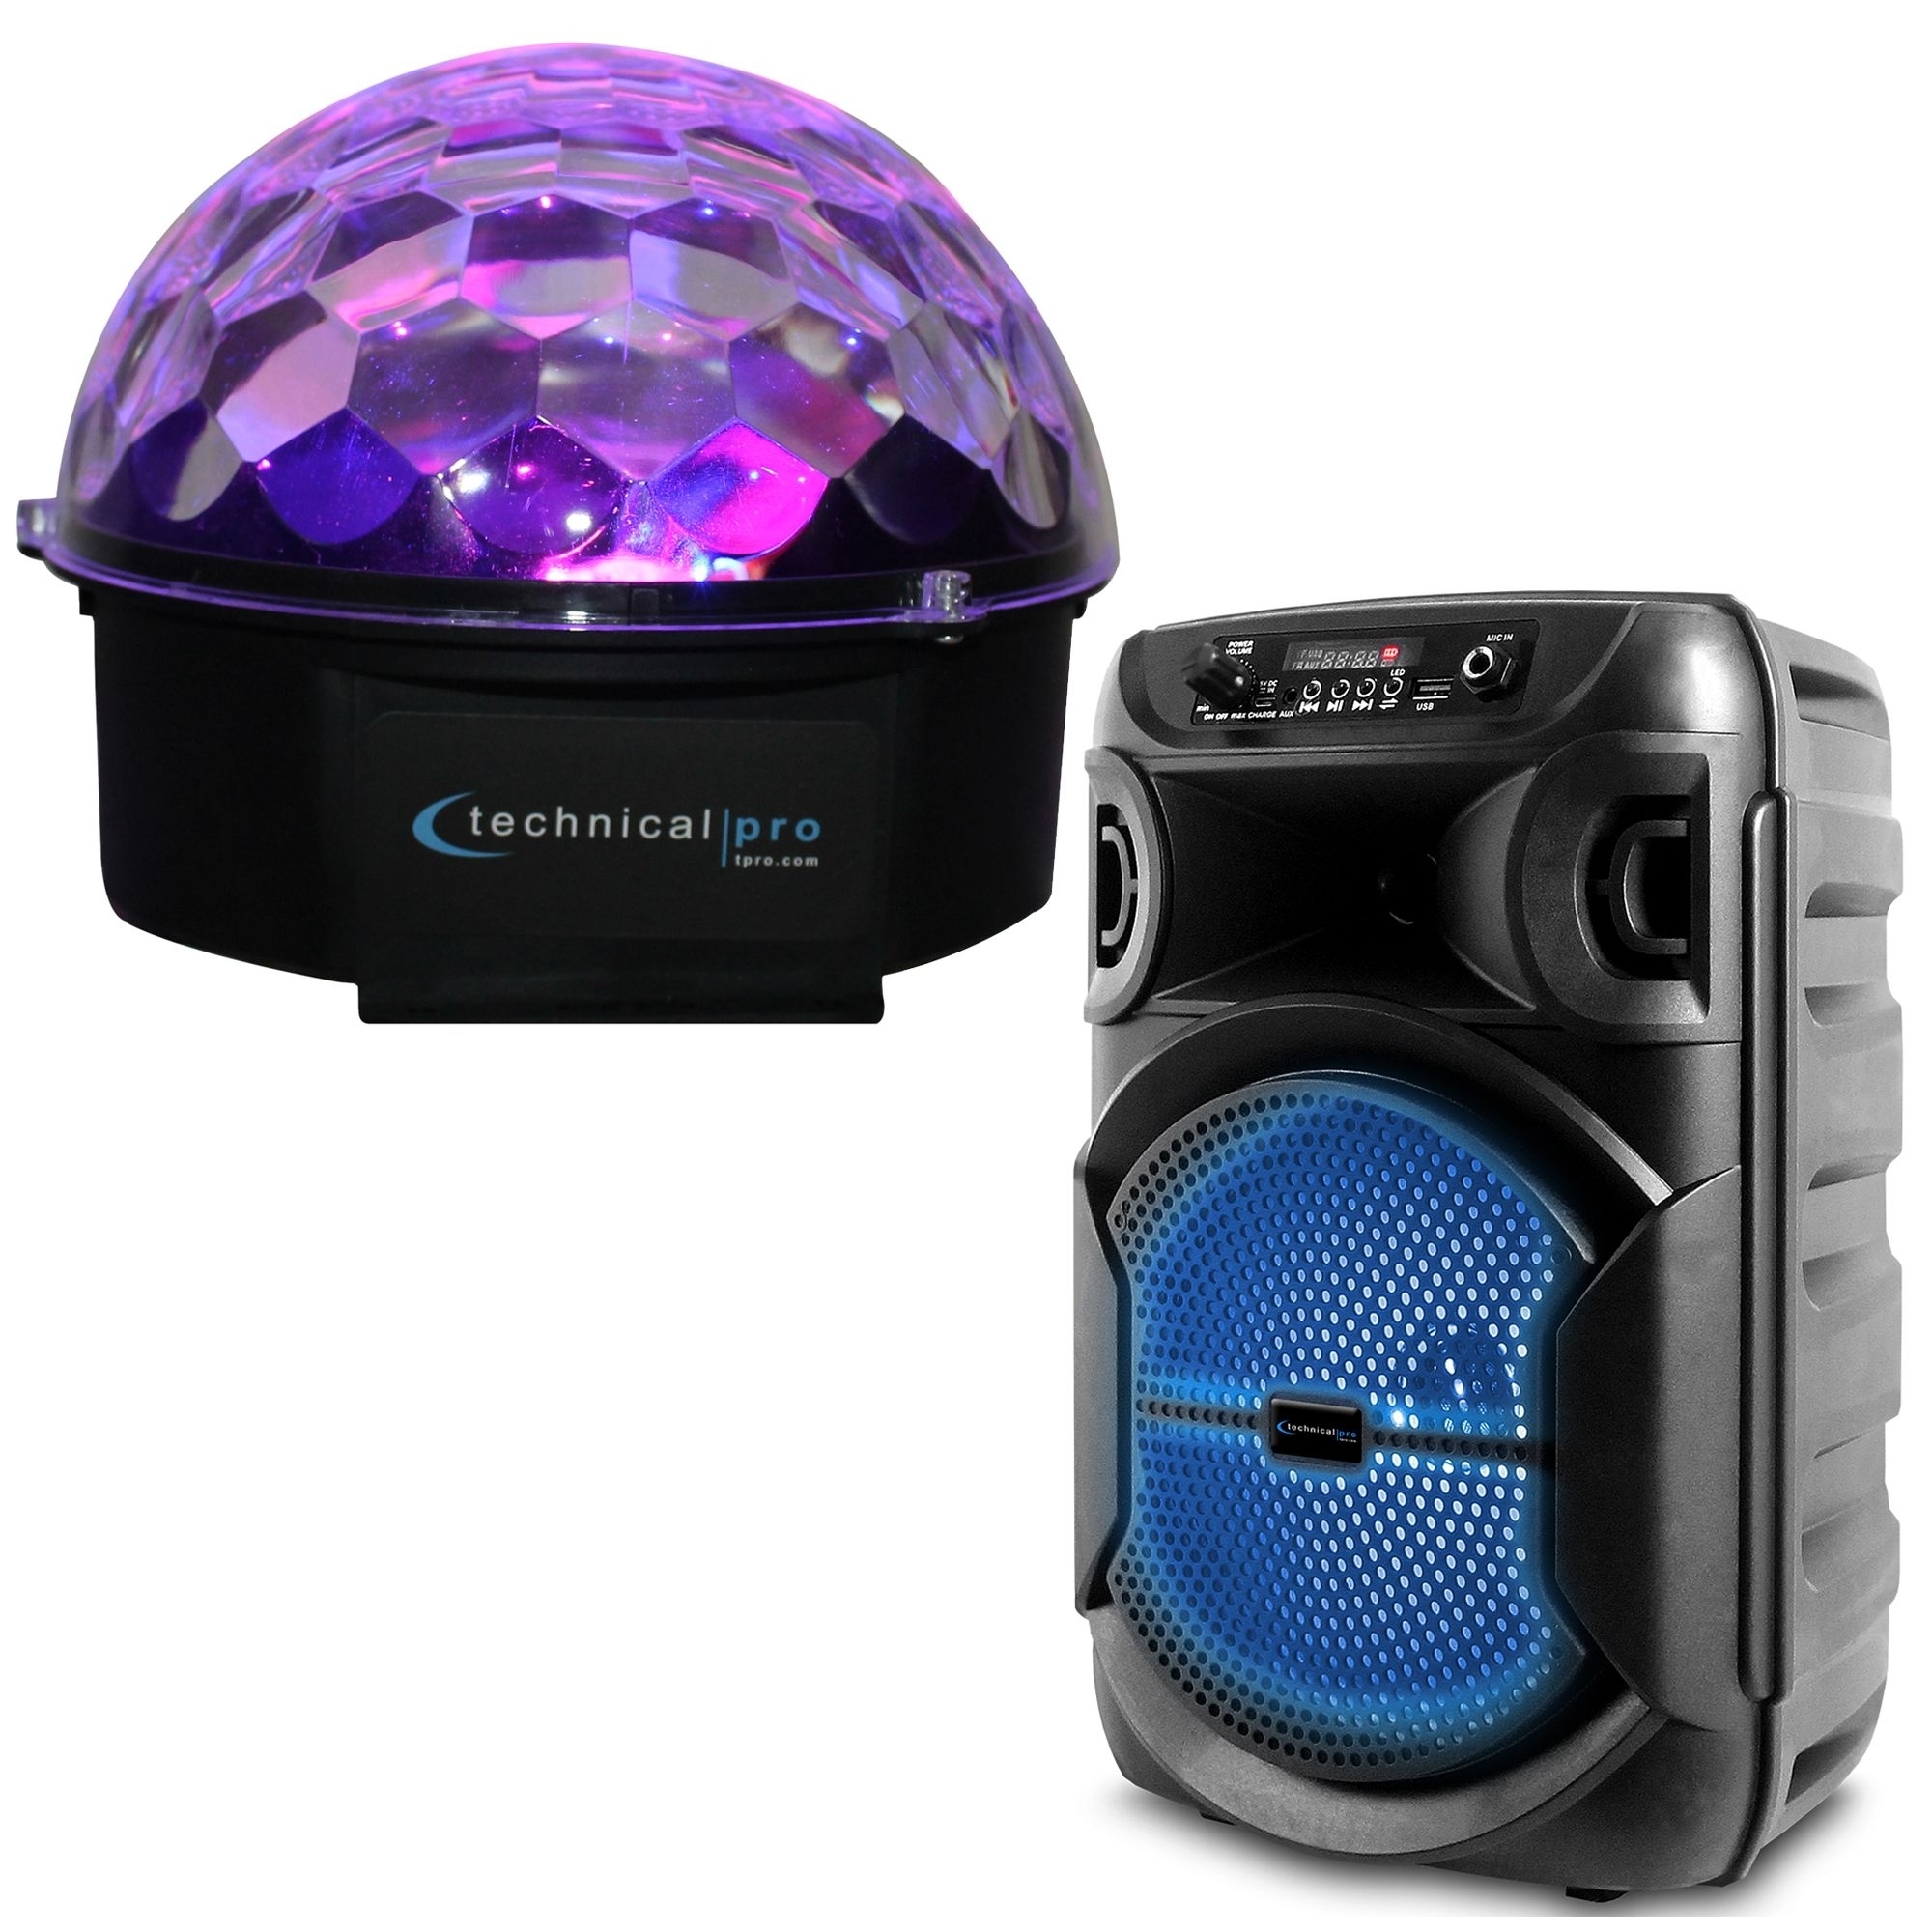 Rotating LED DJ Light, 6 Colors LED W/ 4 Selectable Color Patterns For Party And 8 Portable 1000 Watts Bluetooth Speaker W/ Woofer, Tweeter